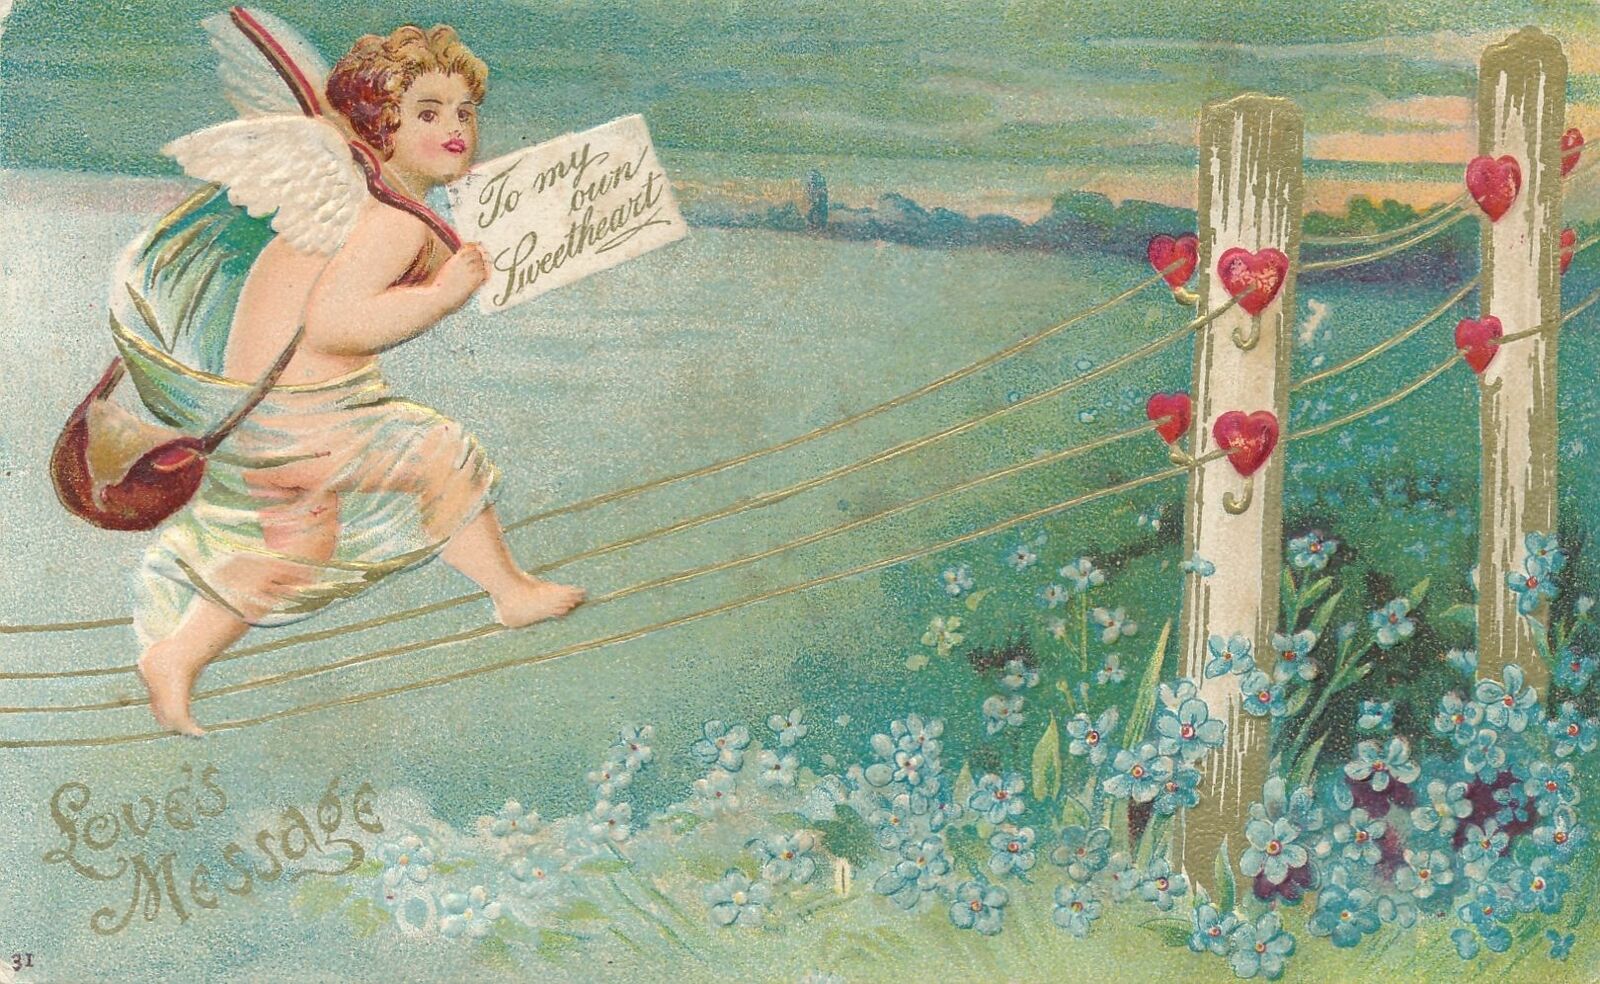 VALENTINE'S DAY - Cupid Walking On Phone Lines to Deliver Card To Sweetheart-udb